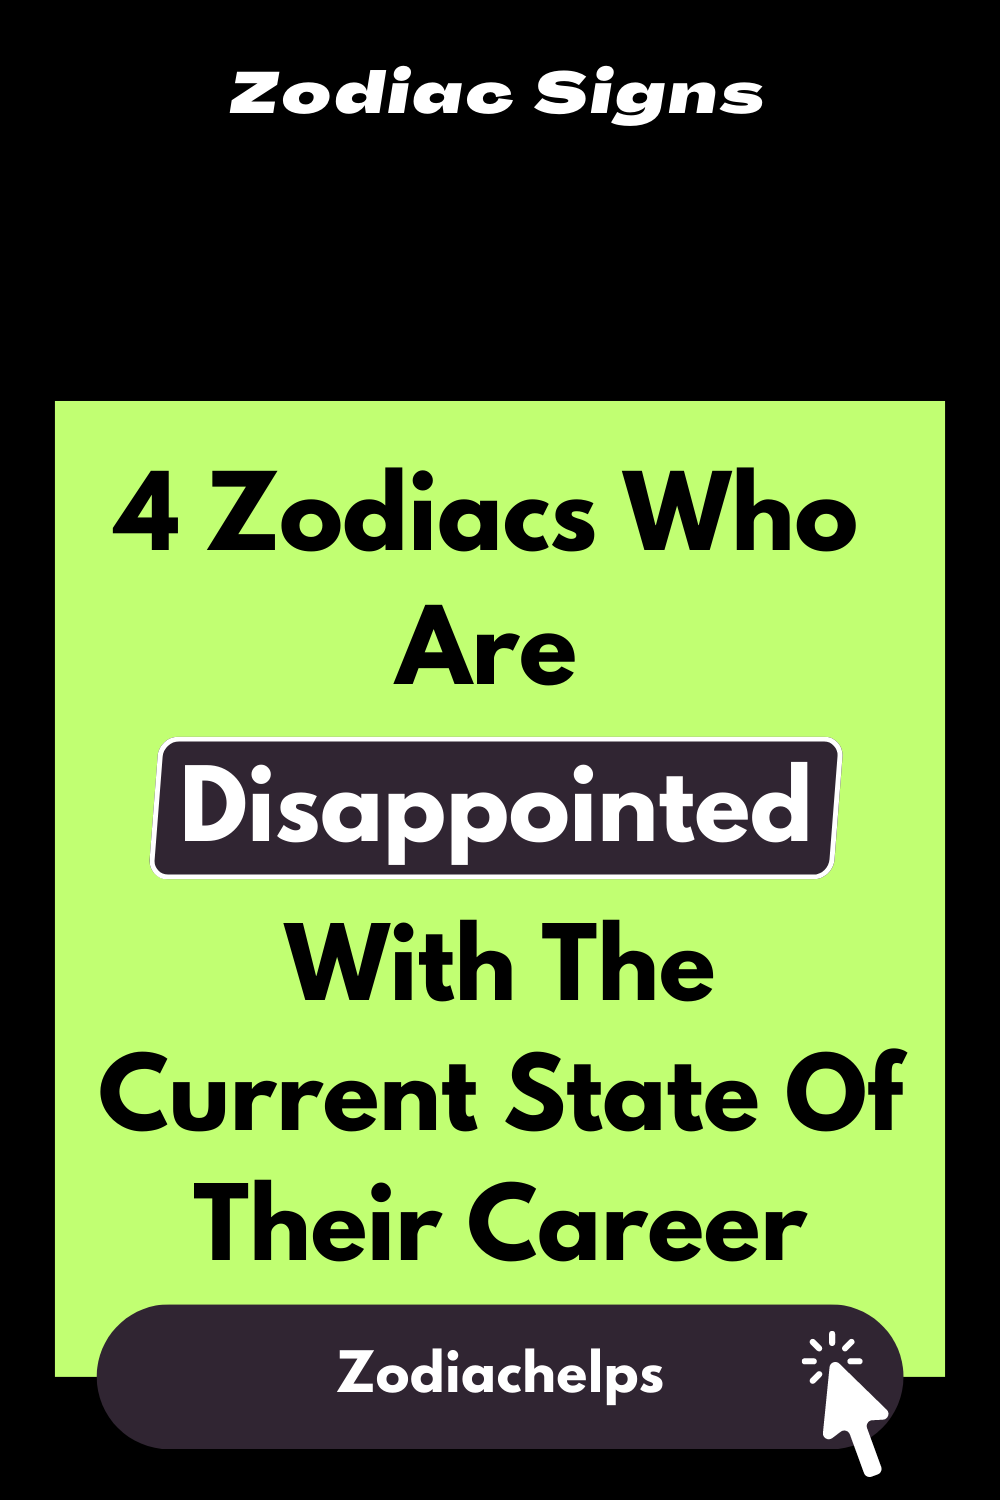 4 Zodiacs Who Are Disappointed With The Current State Of Their Career